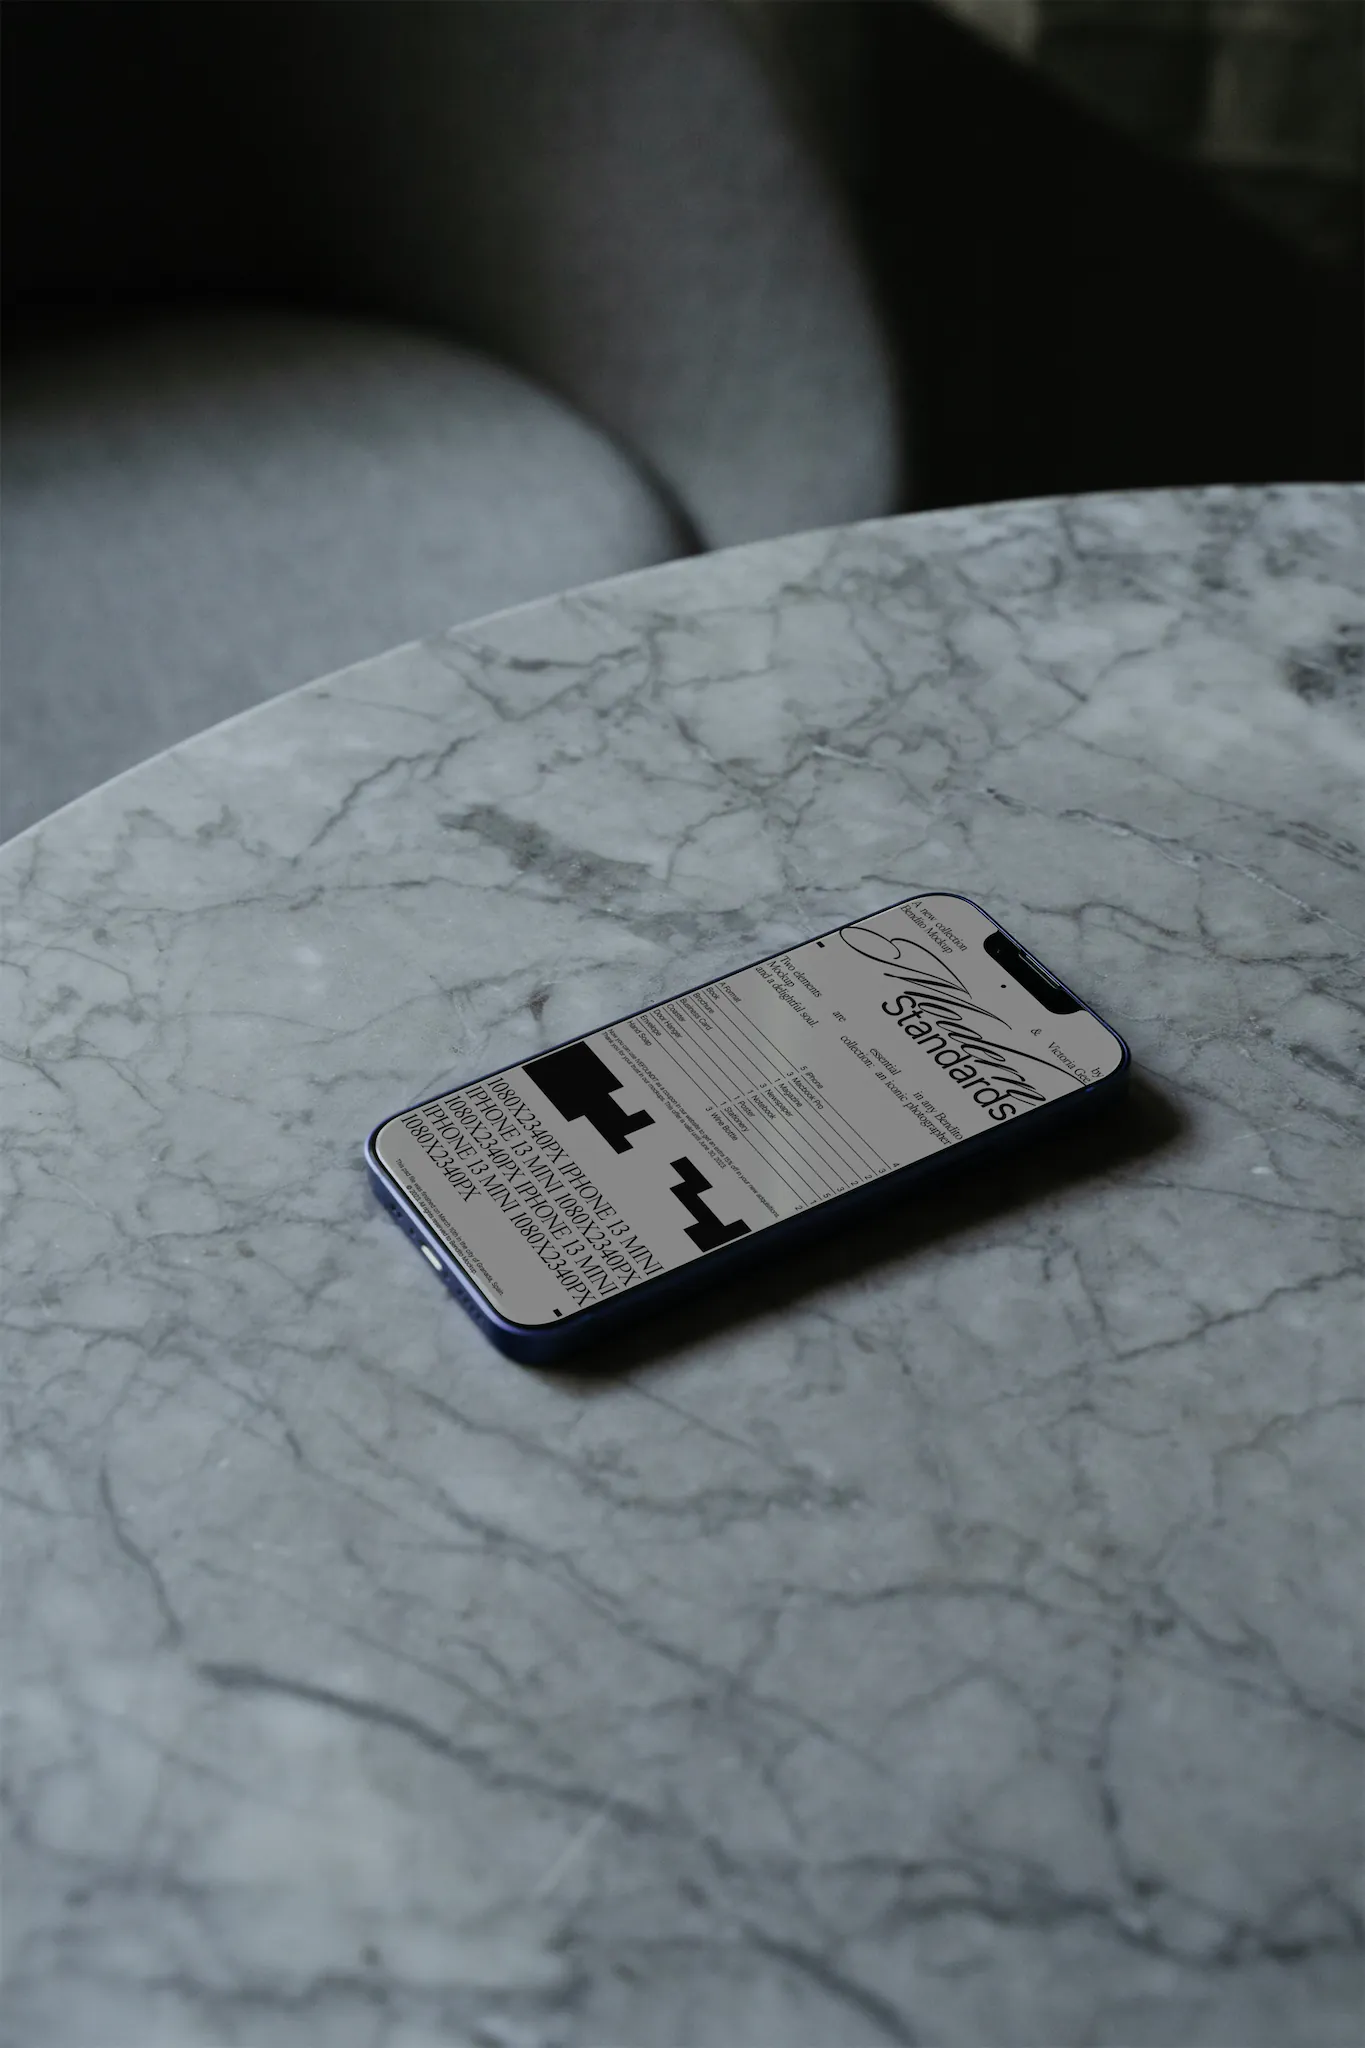 Iphone mockup on top of an elegan marble table